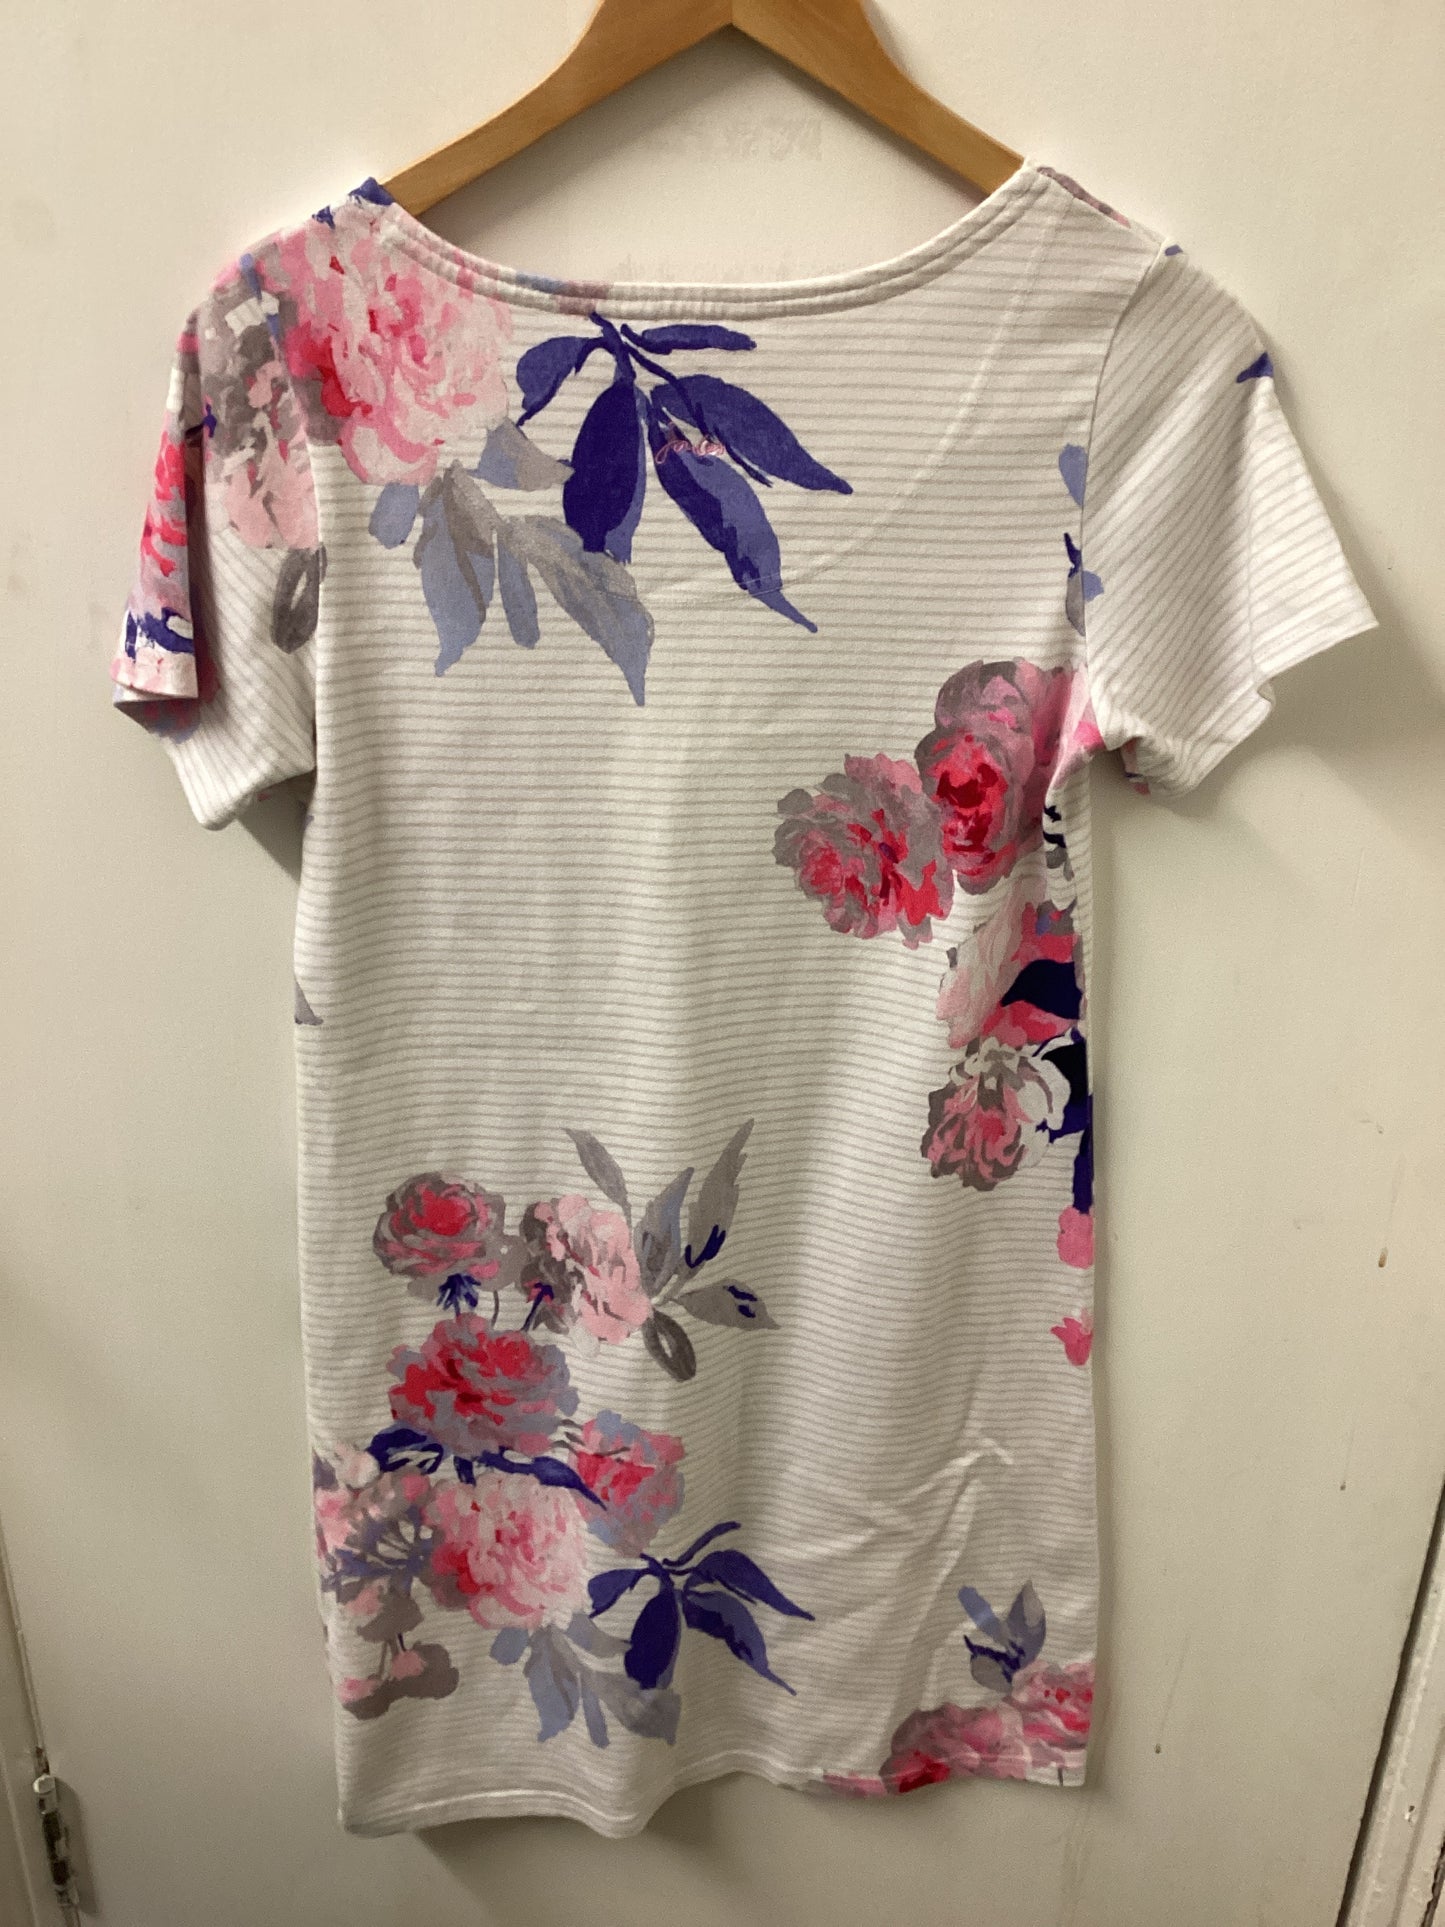 Joules White Floral Pattern Short Sleeve Dress Size UK 12